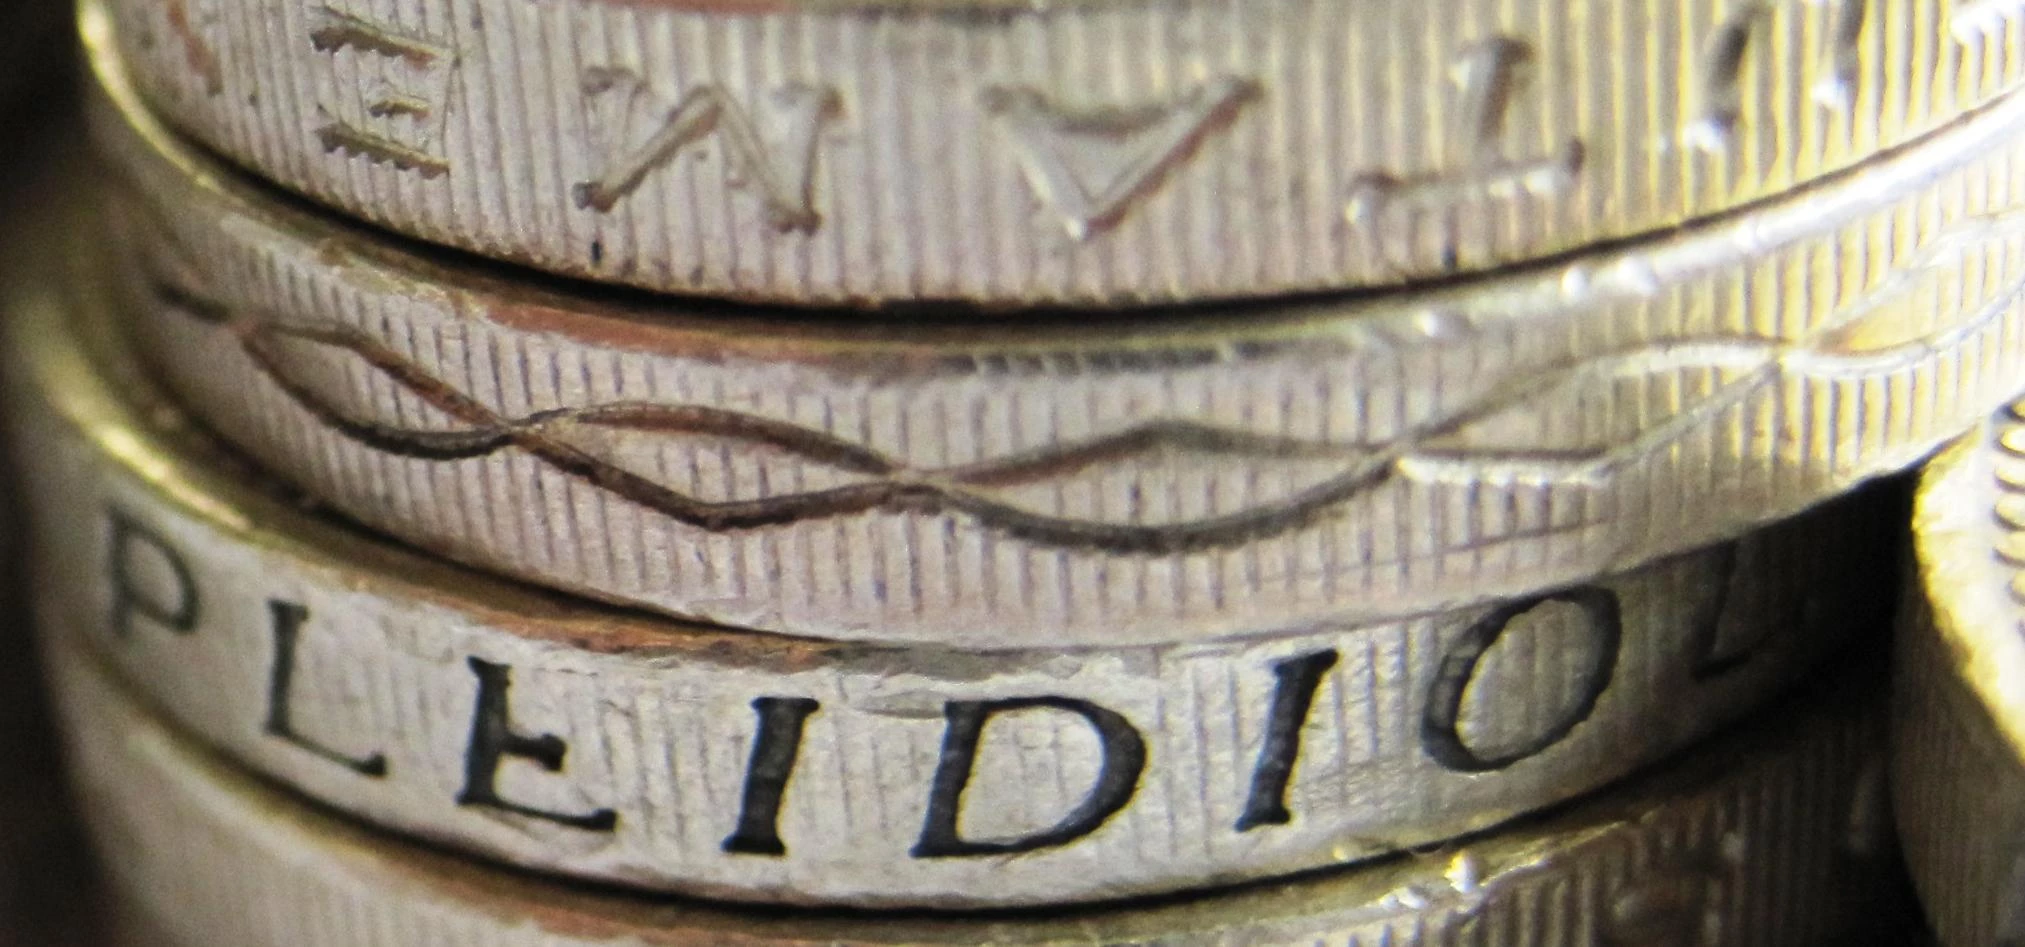 Close up of pound coins